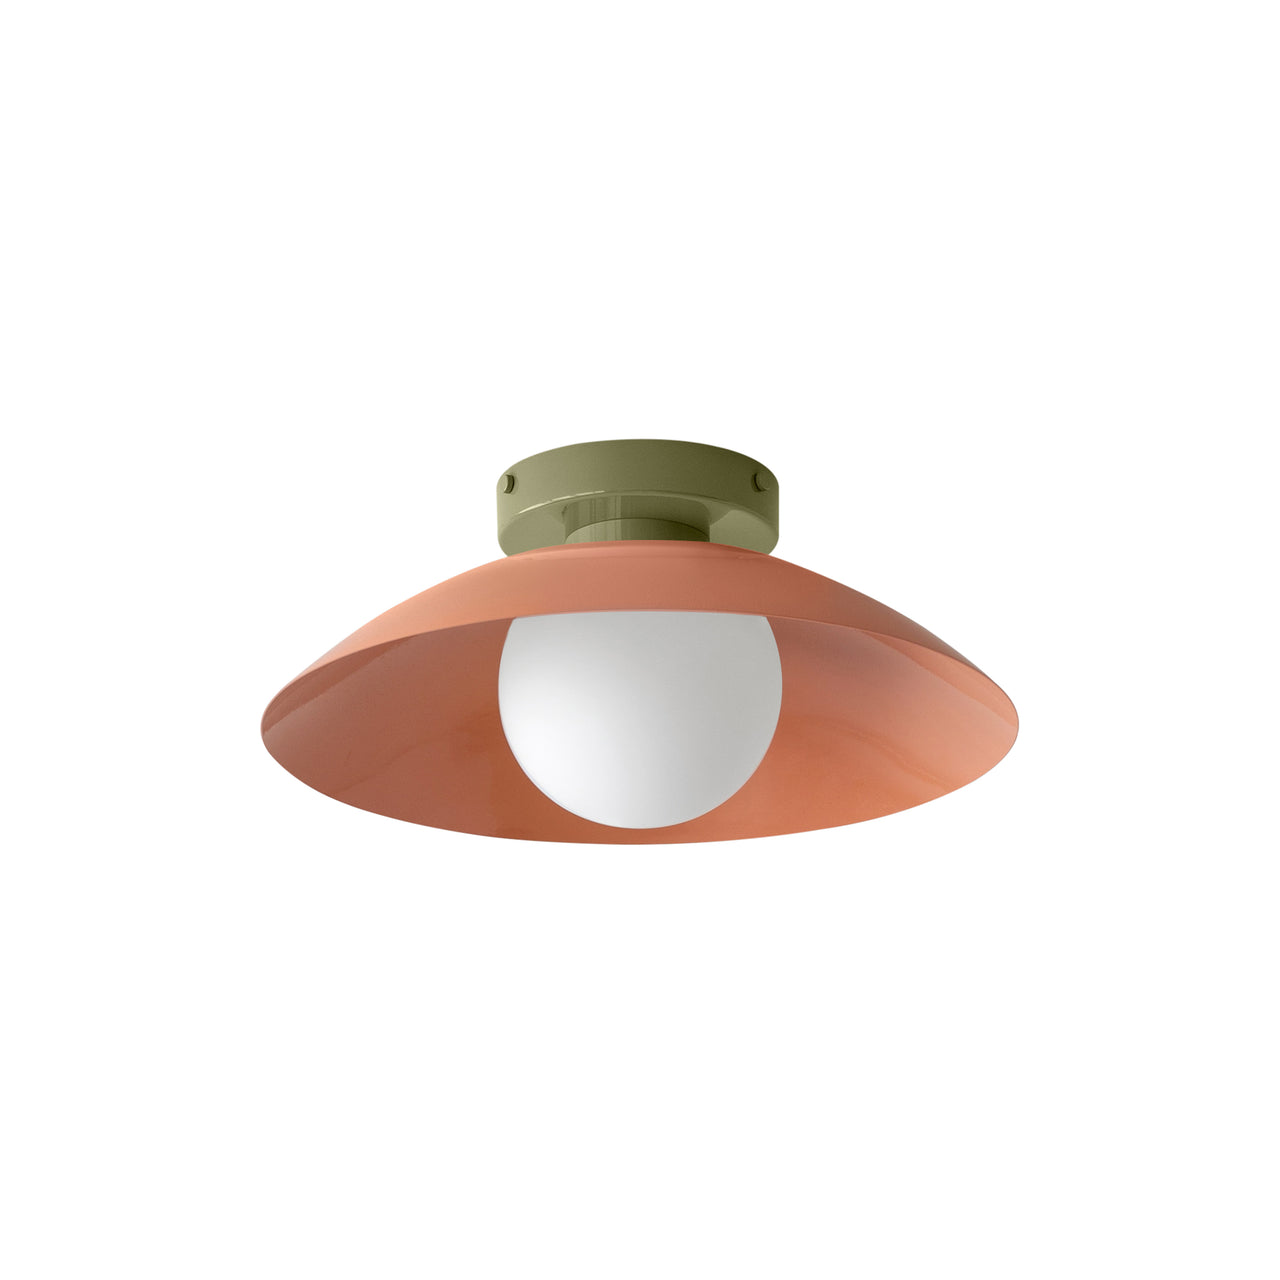 Arundel Orb Surface Mount: Peach + Reed Green + Hardwire